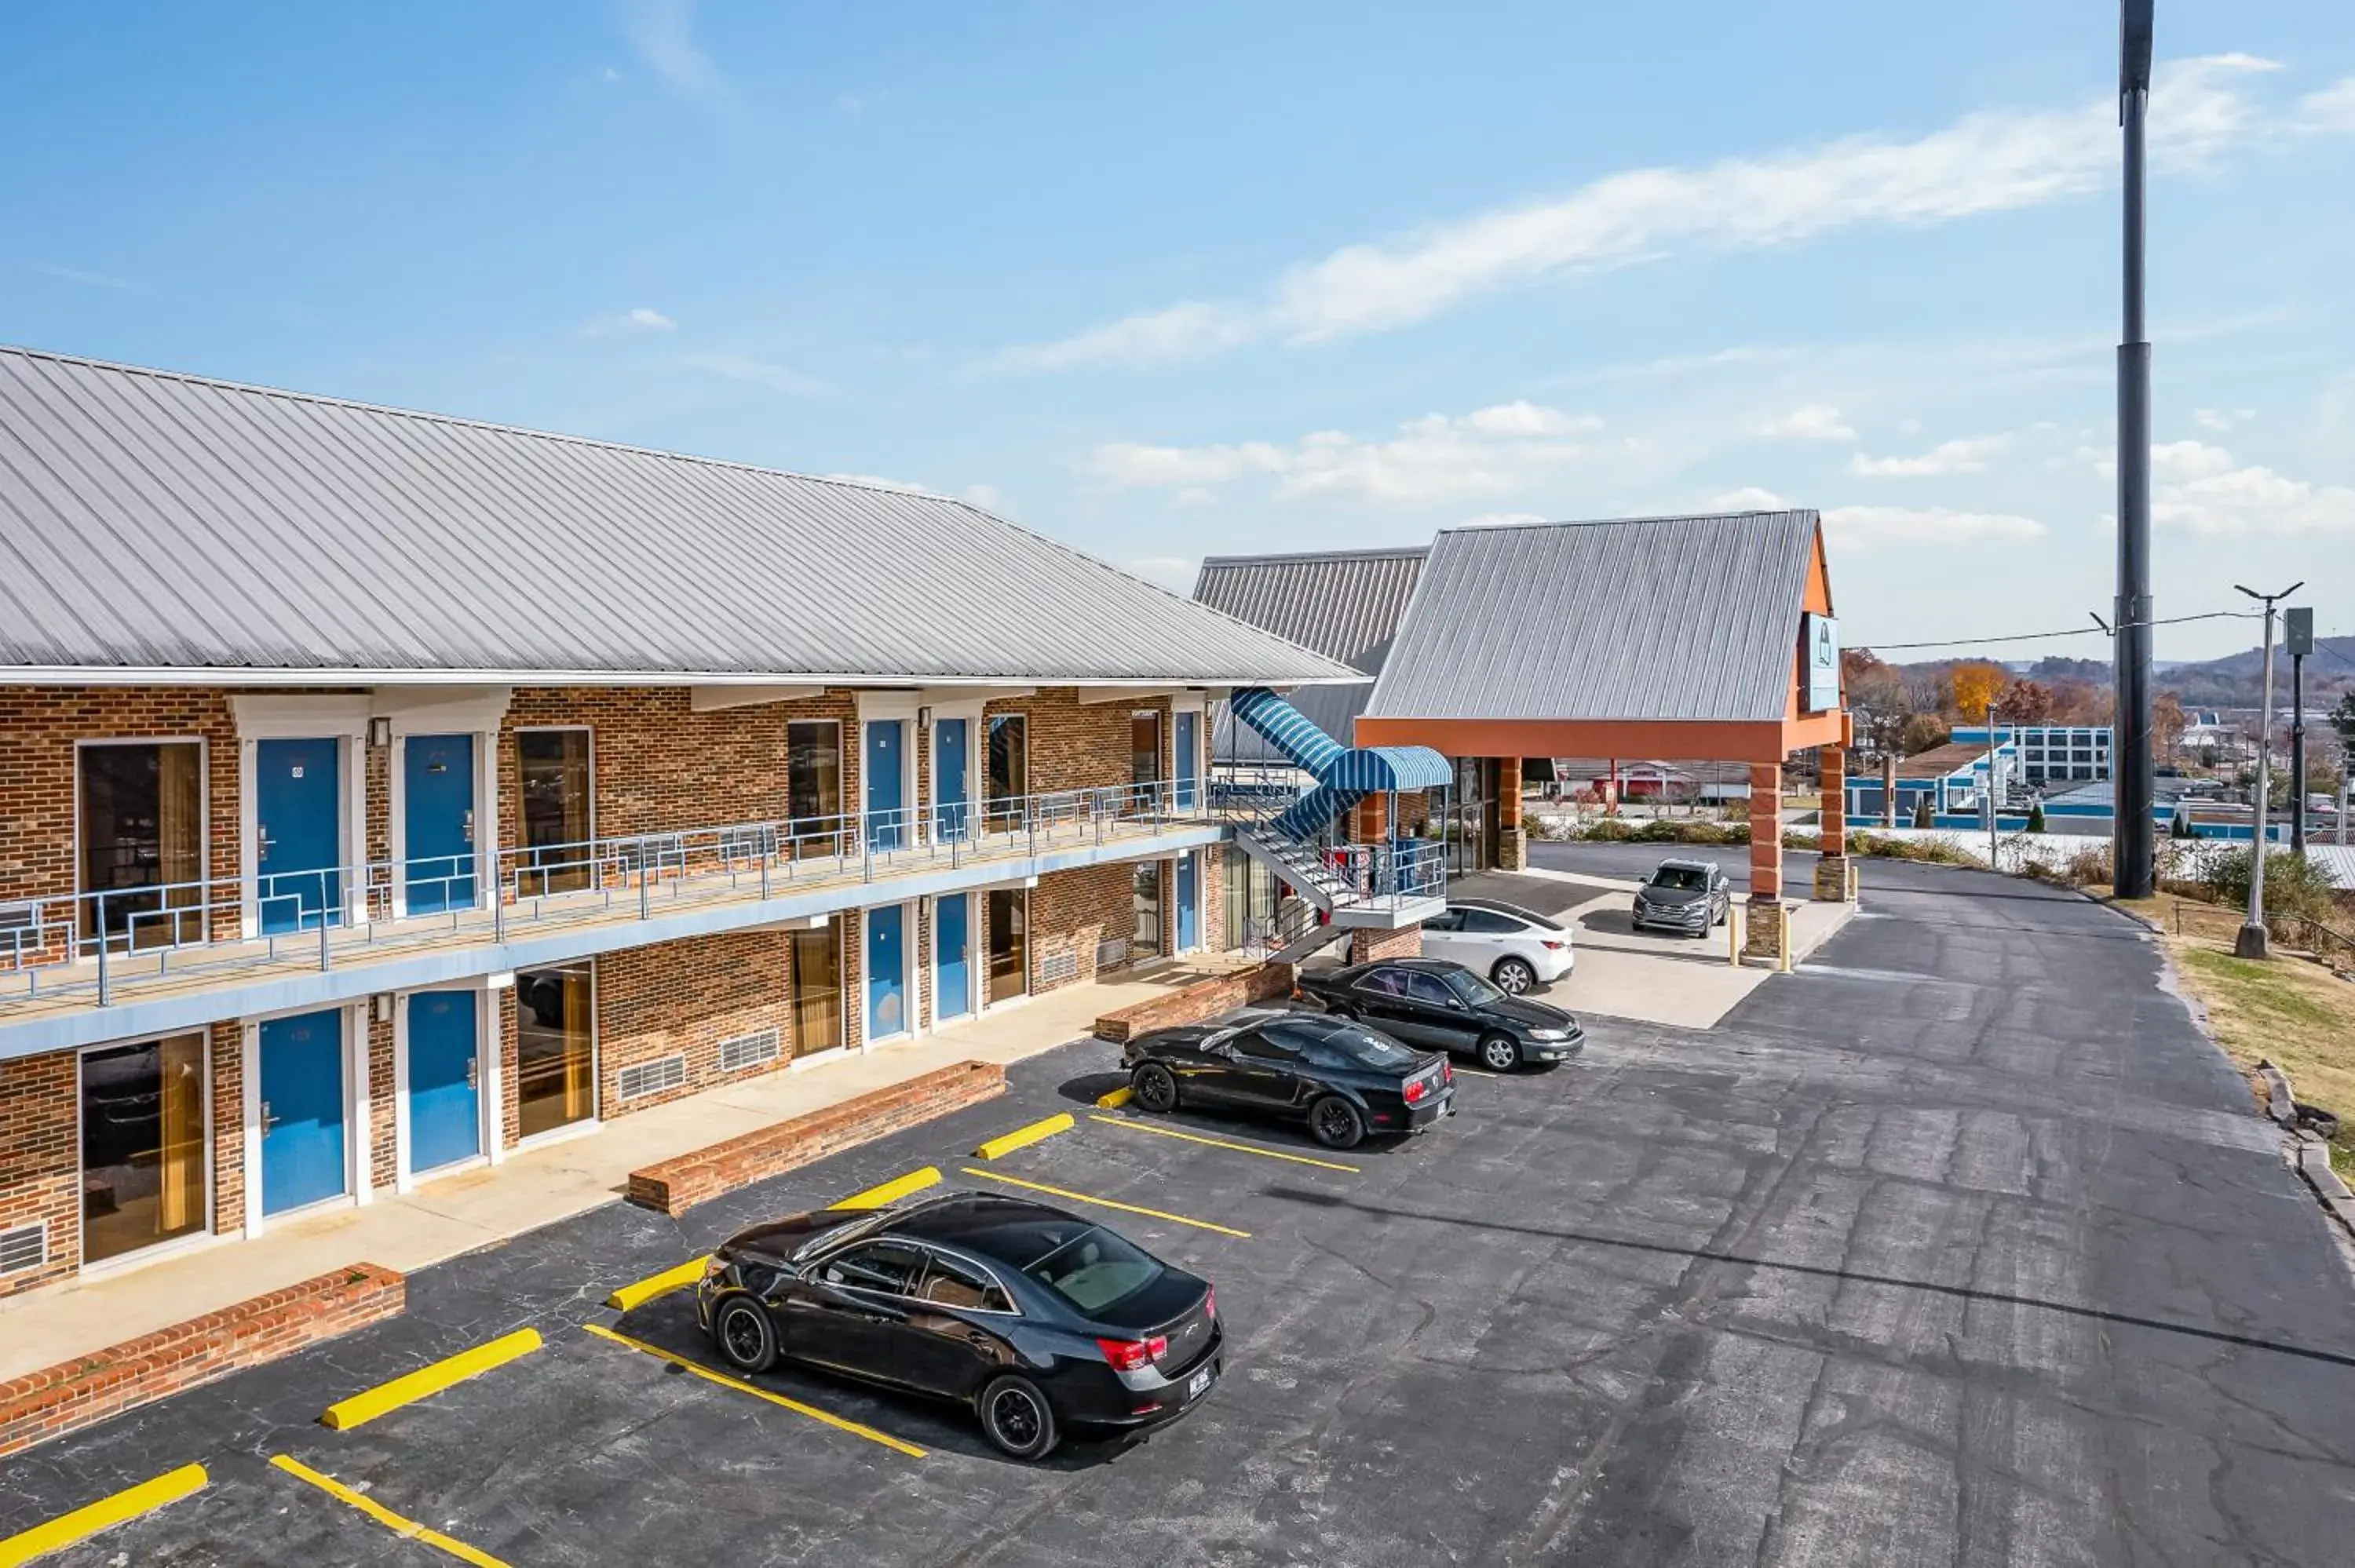 Property building in Americas Best Value Inn Cookeville